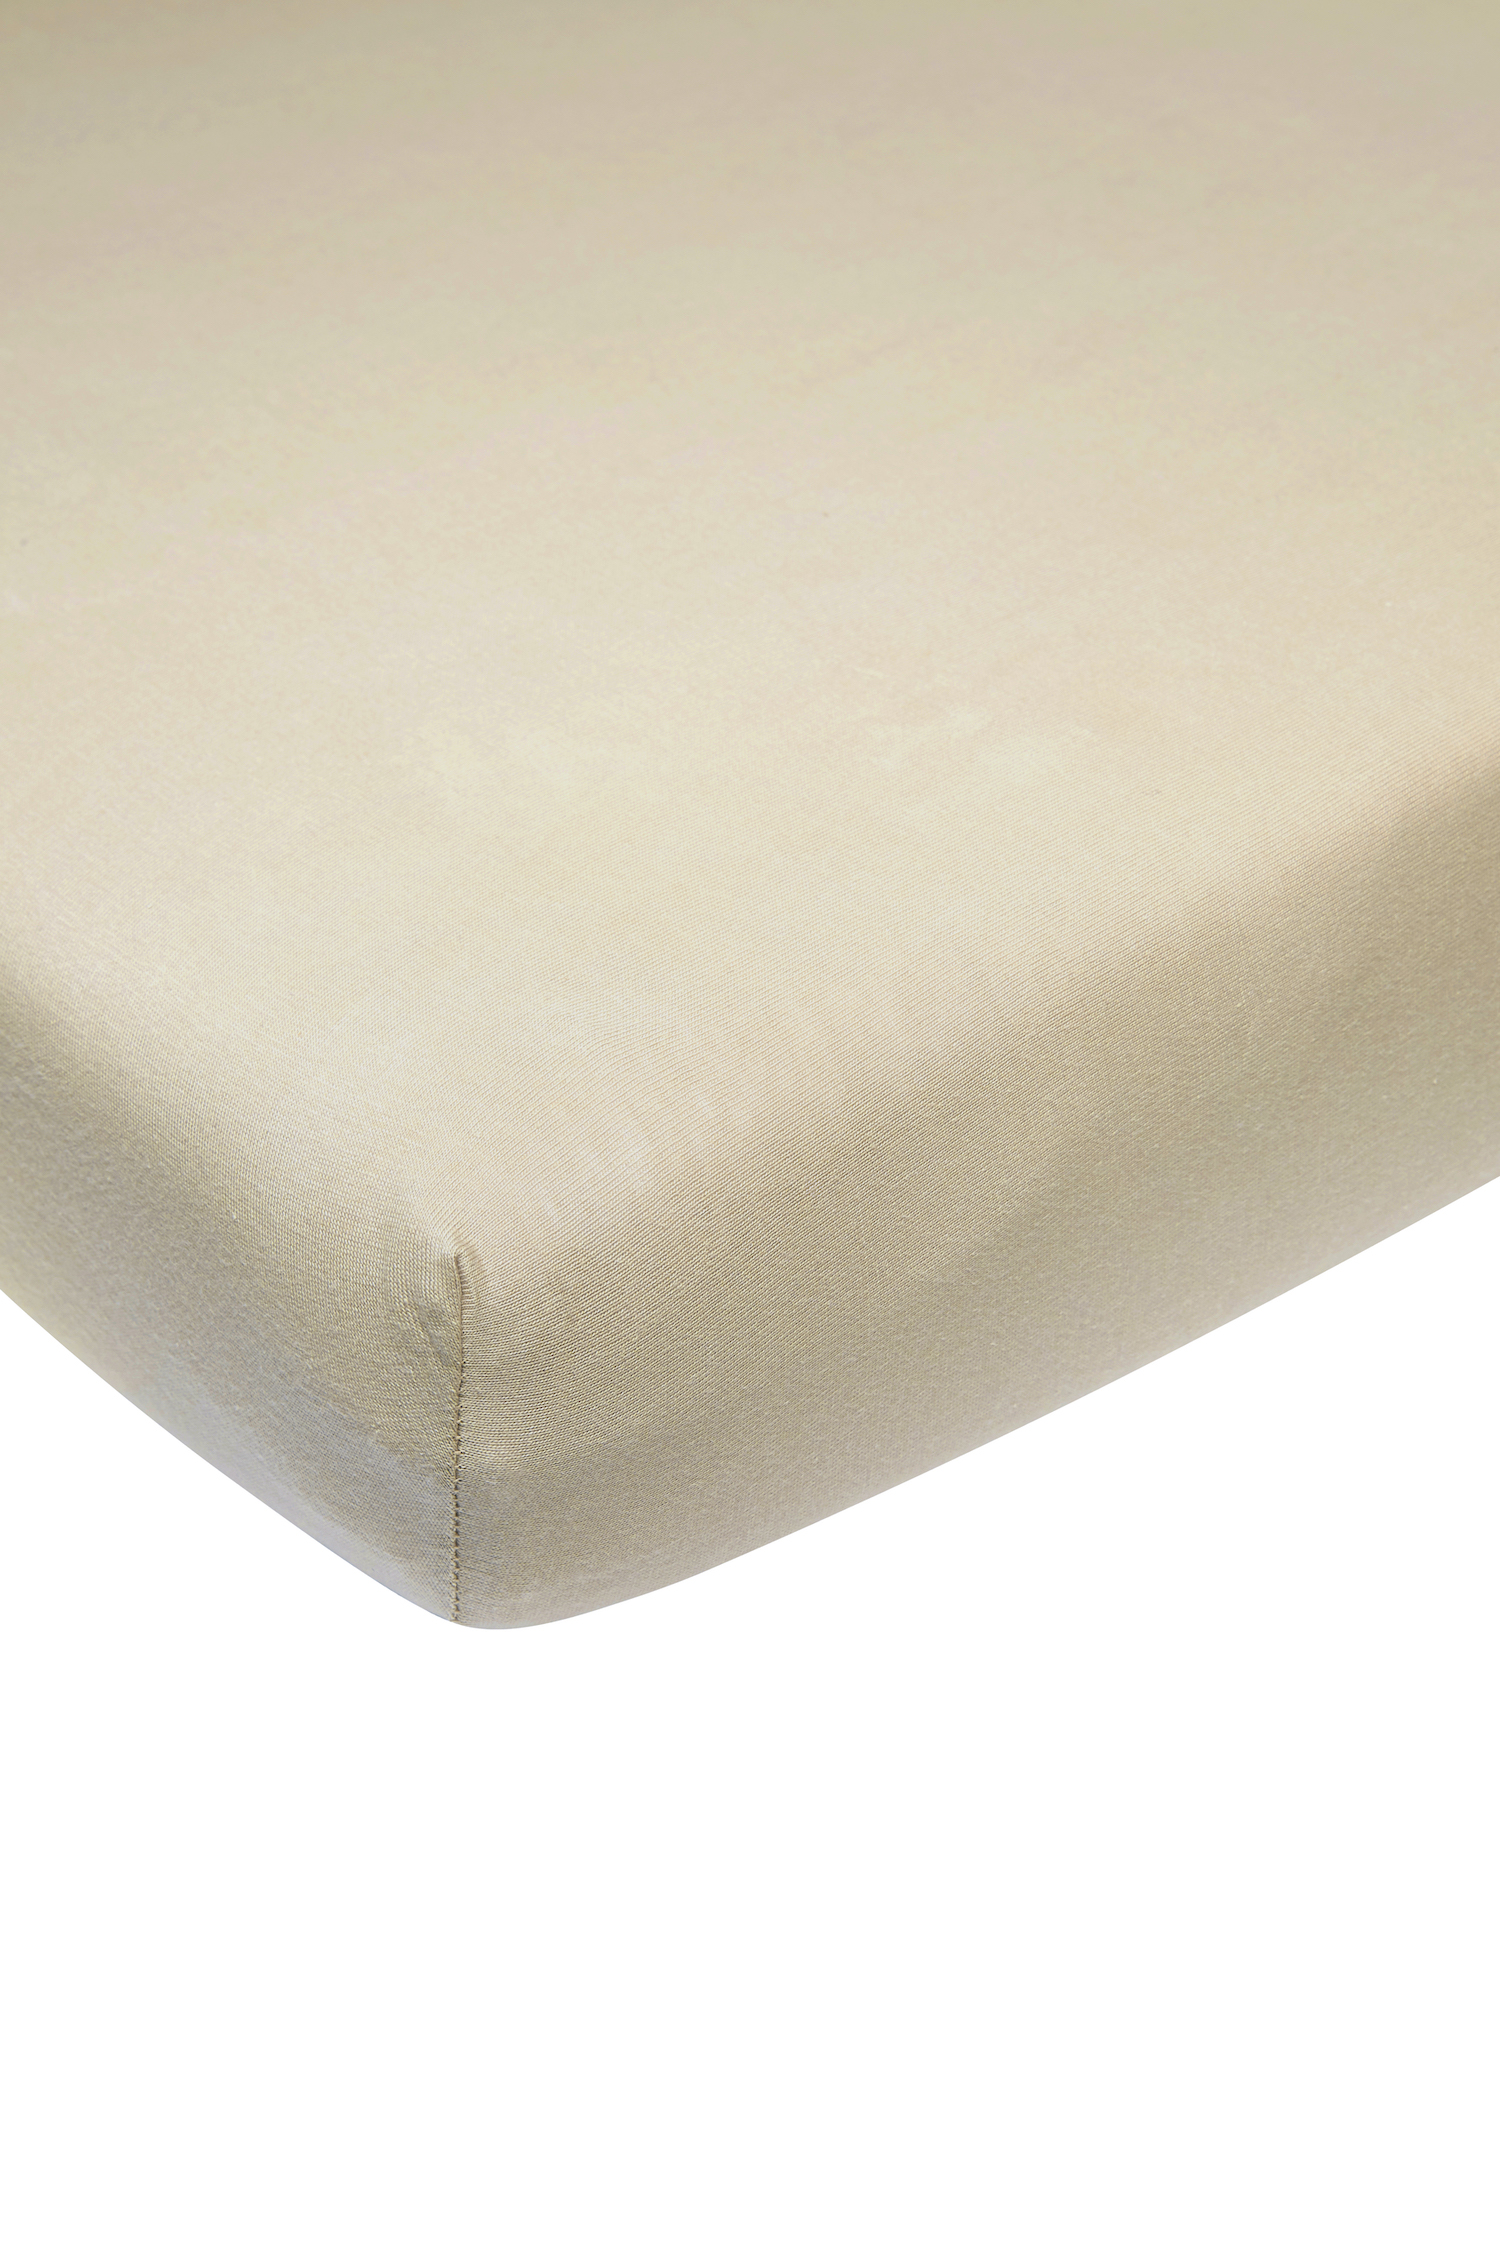 Fitted sheet 1-Pers. Uni - sand - 90x200cm